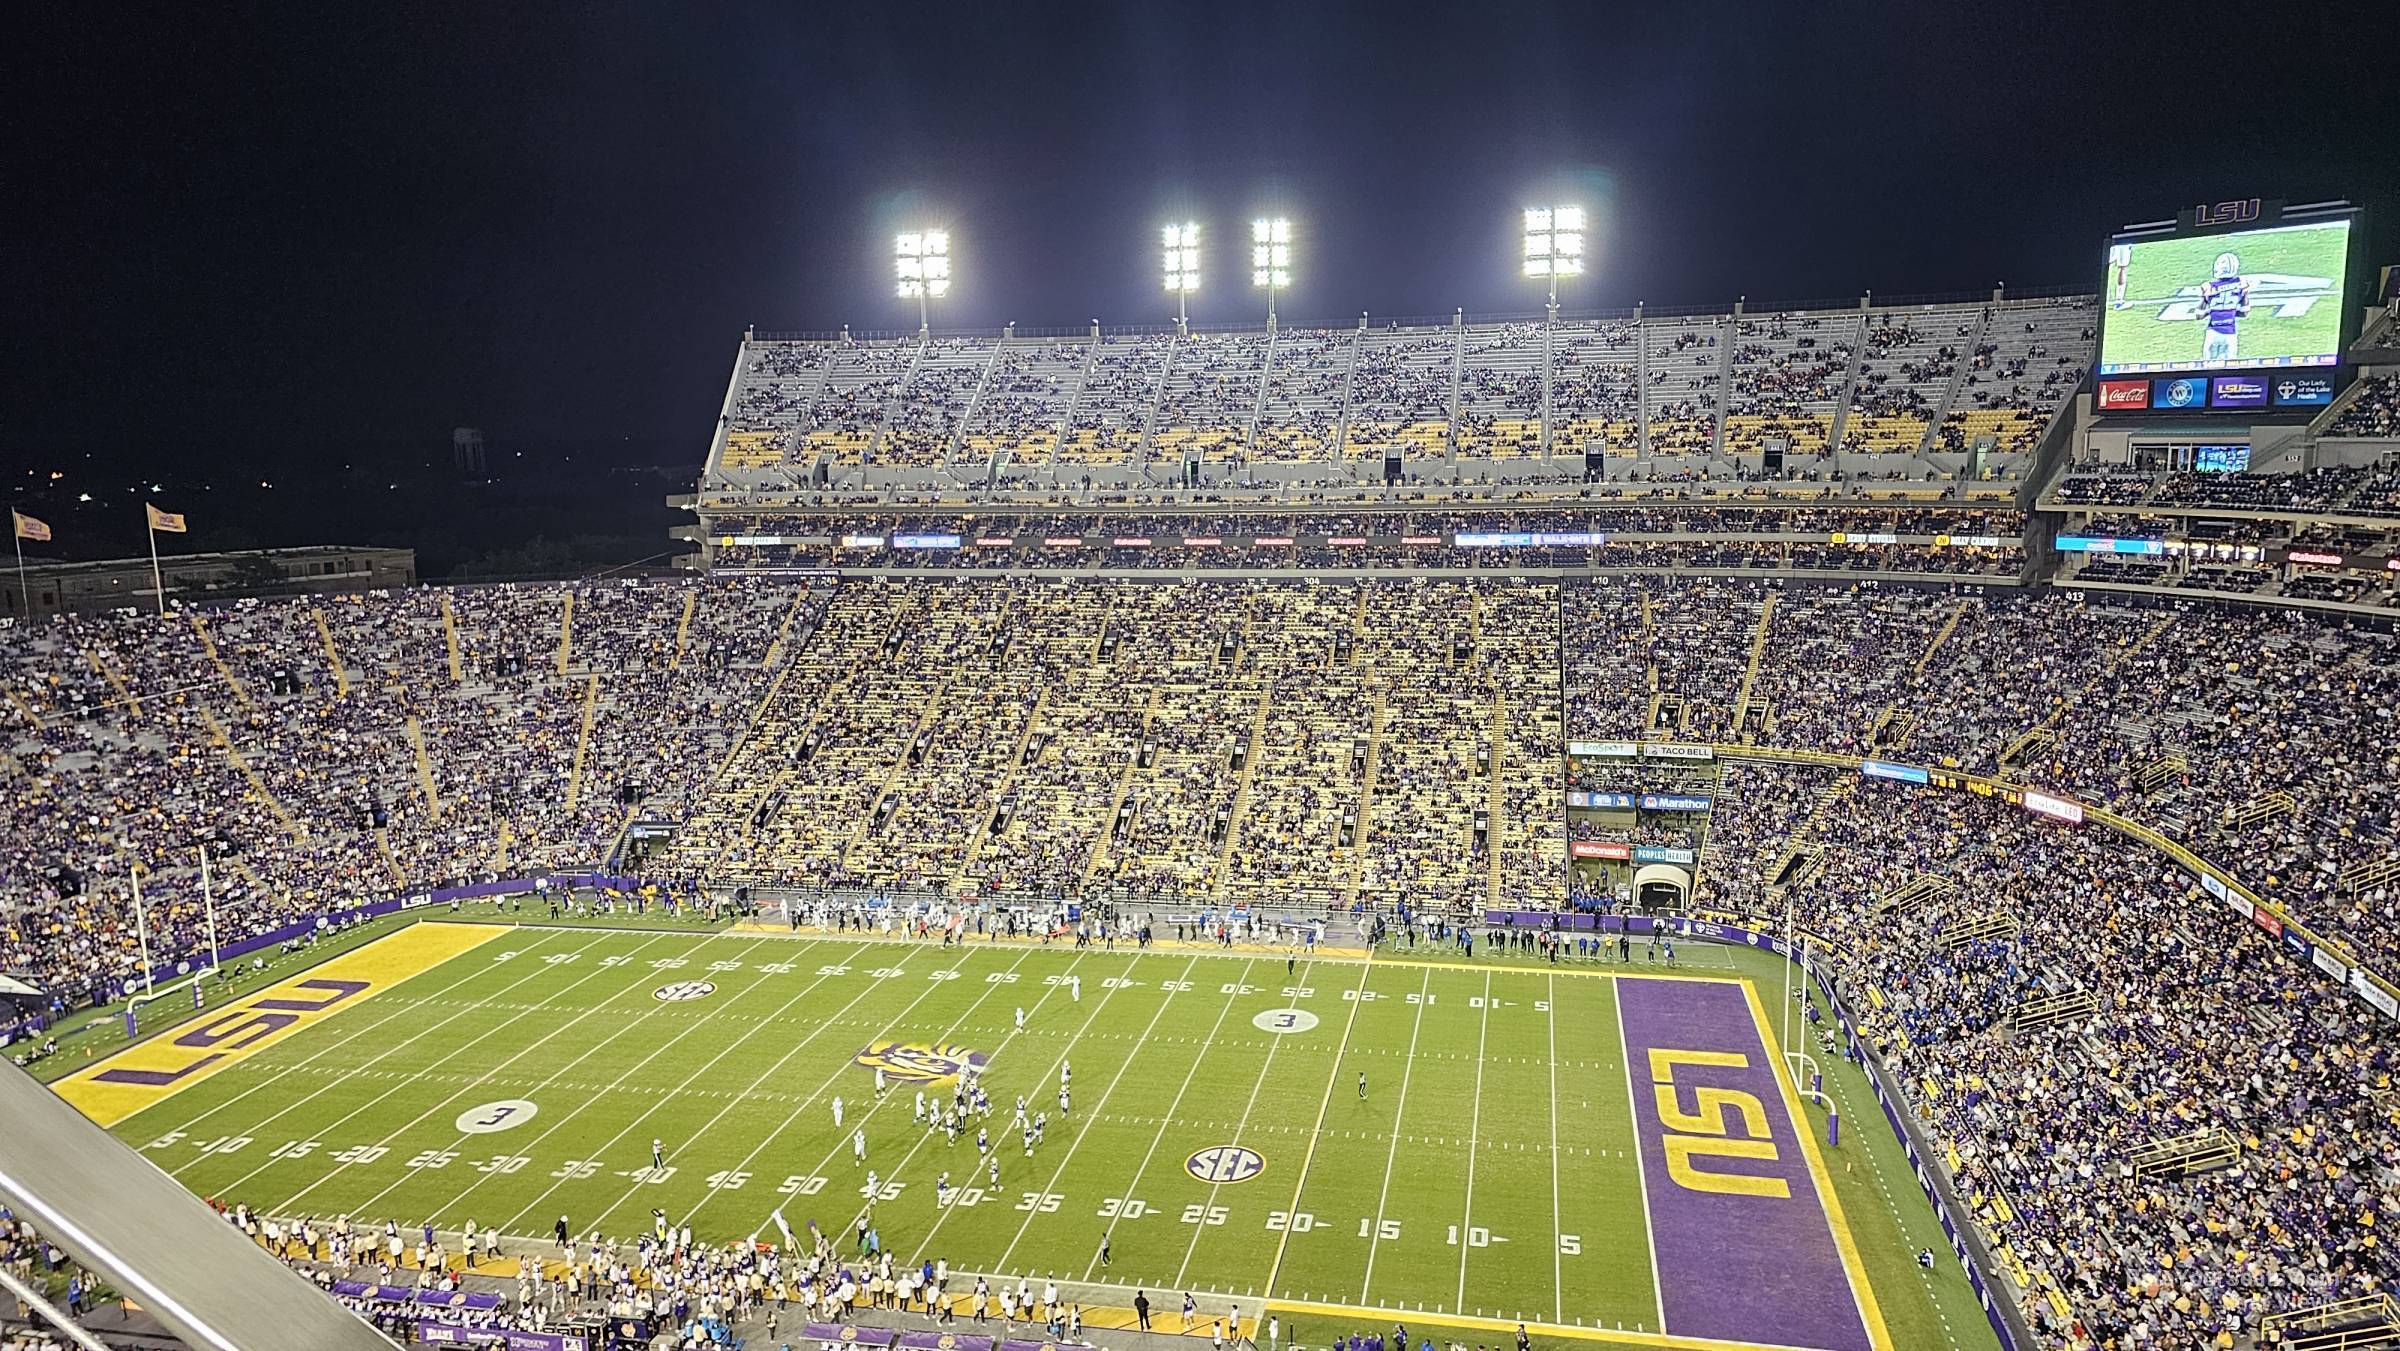 section 613, row 1 seat view  - tiger stadium